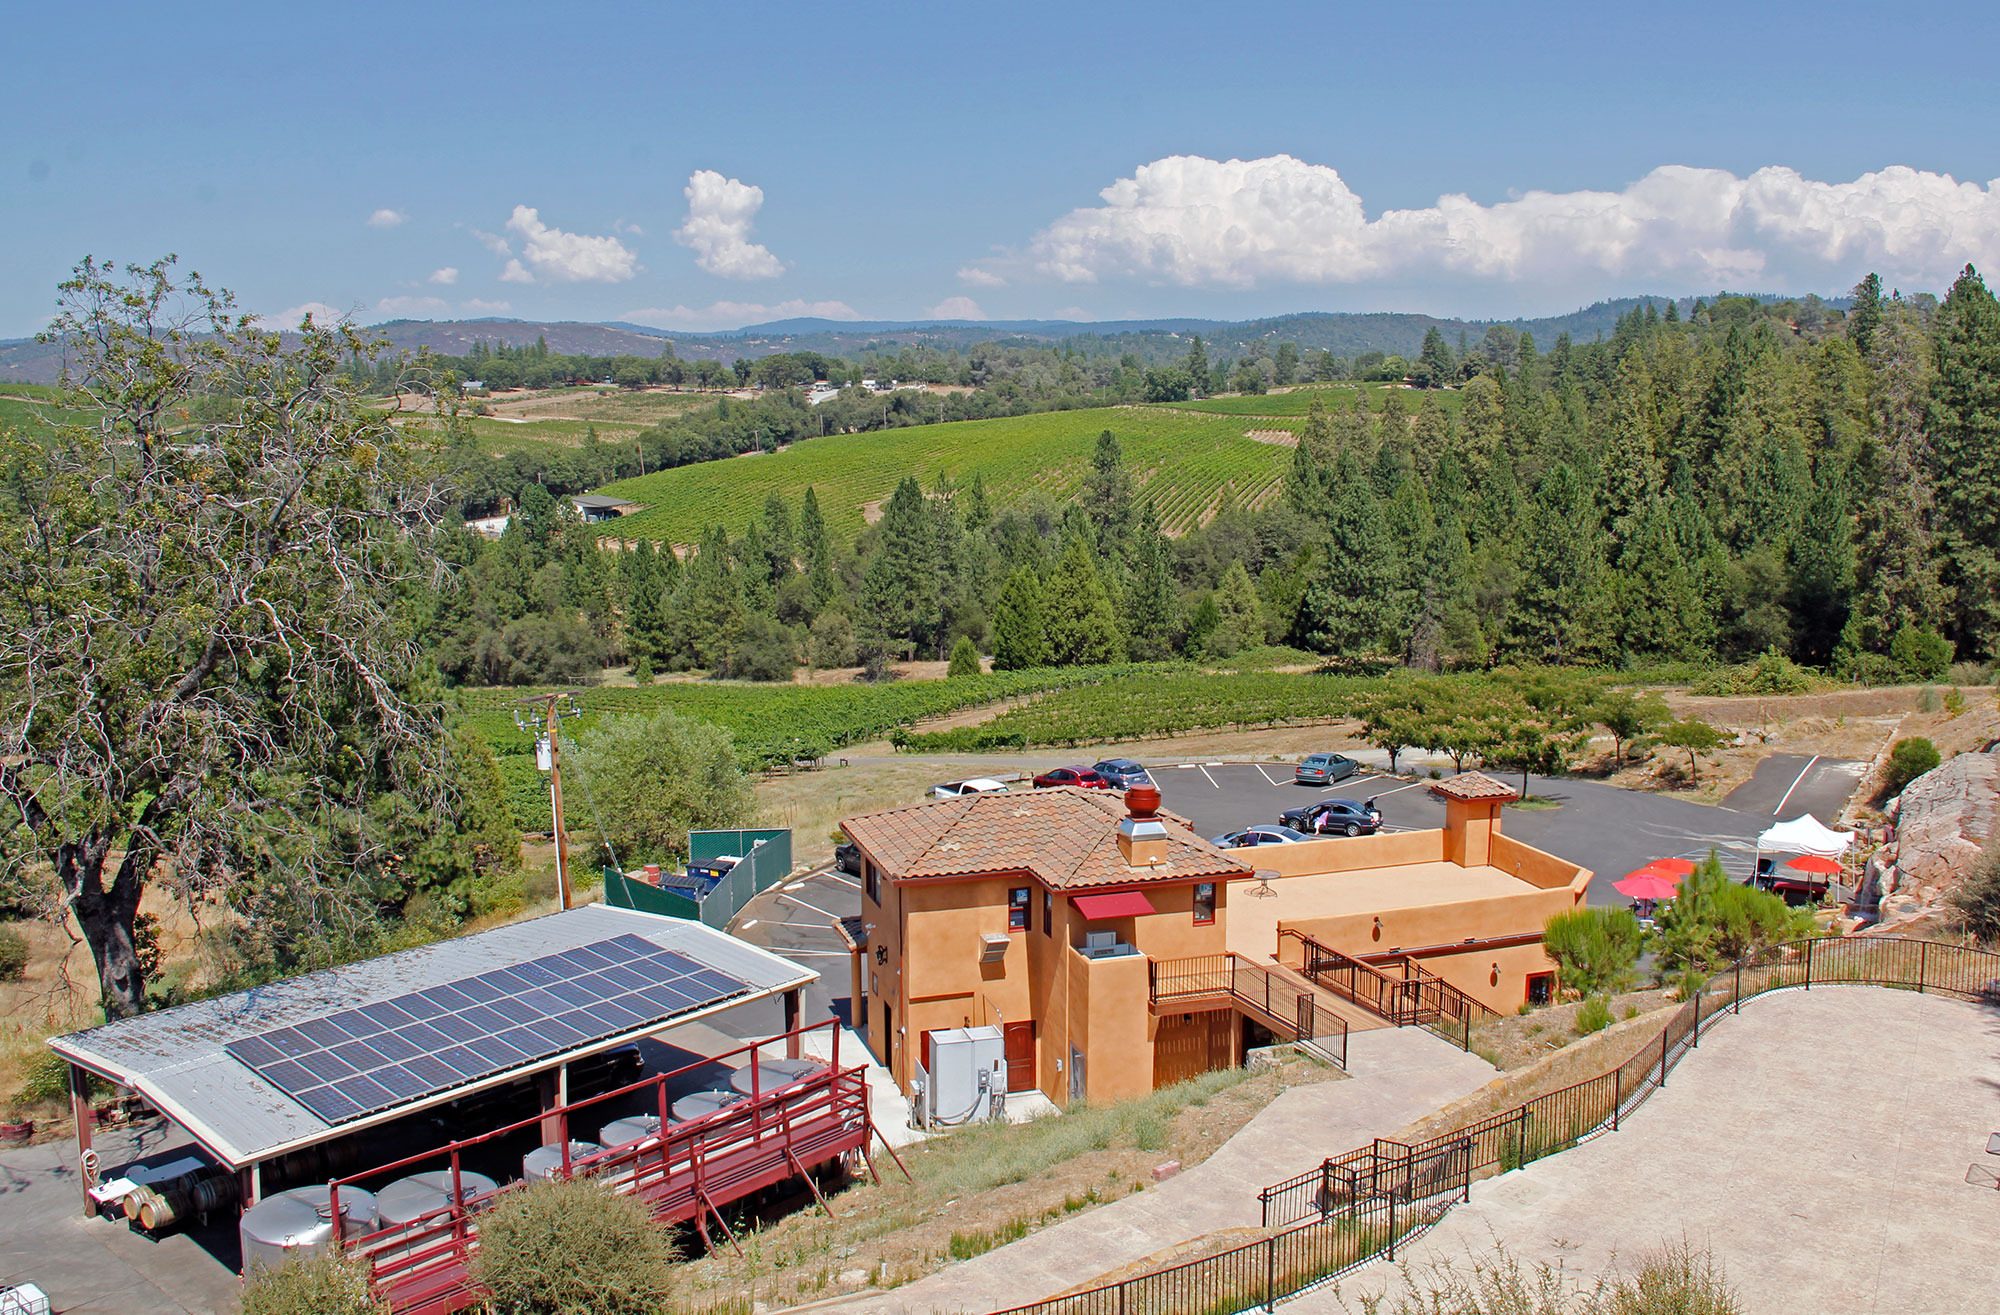 Spectacular Vineyard and Winery Setting in the Sierra Foothiils